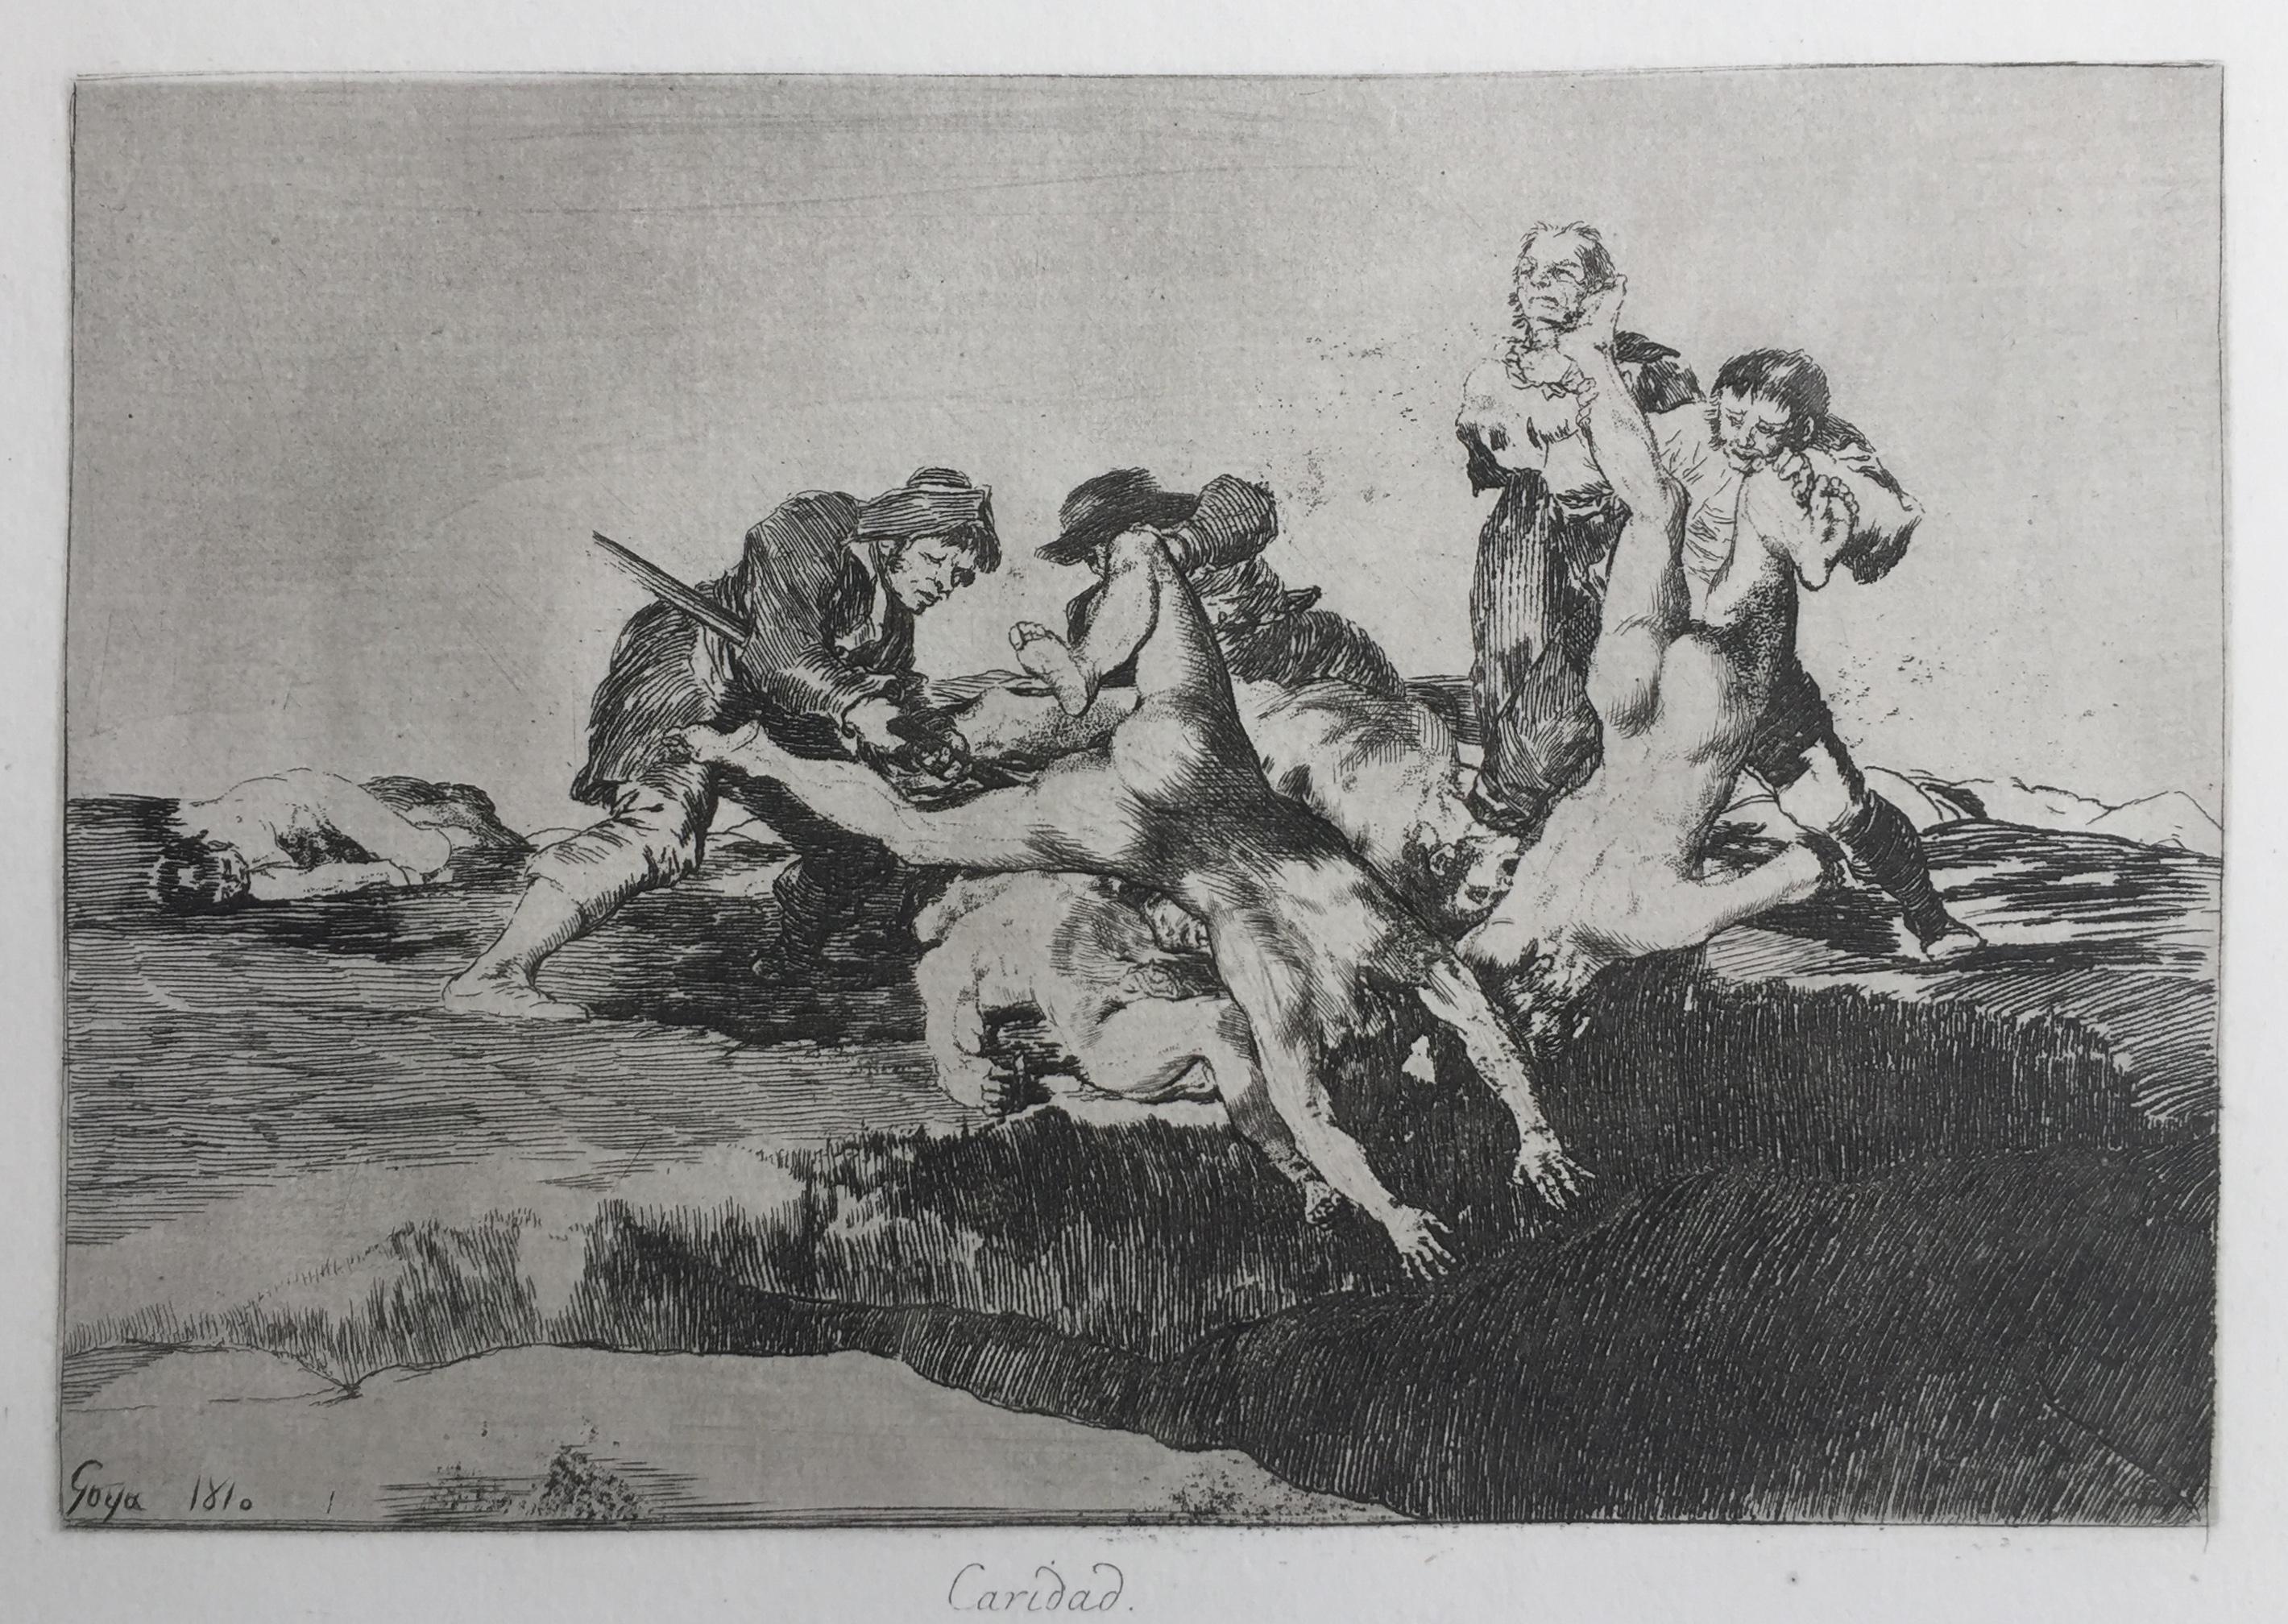 Francisco Goya Figurative Print - CARIDAD (CHARITY)  -   From "The Disasters of War"